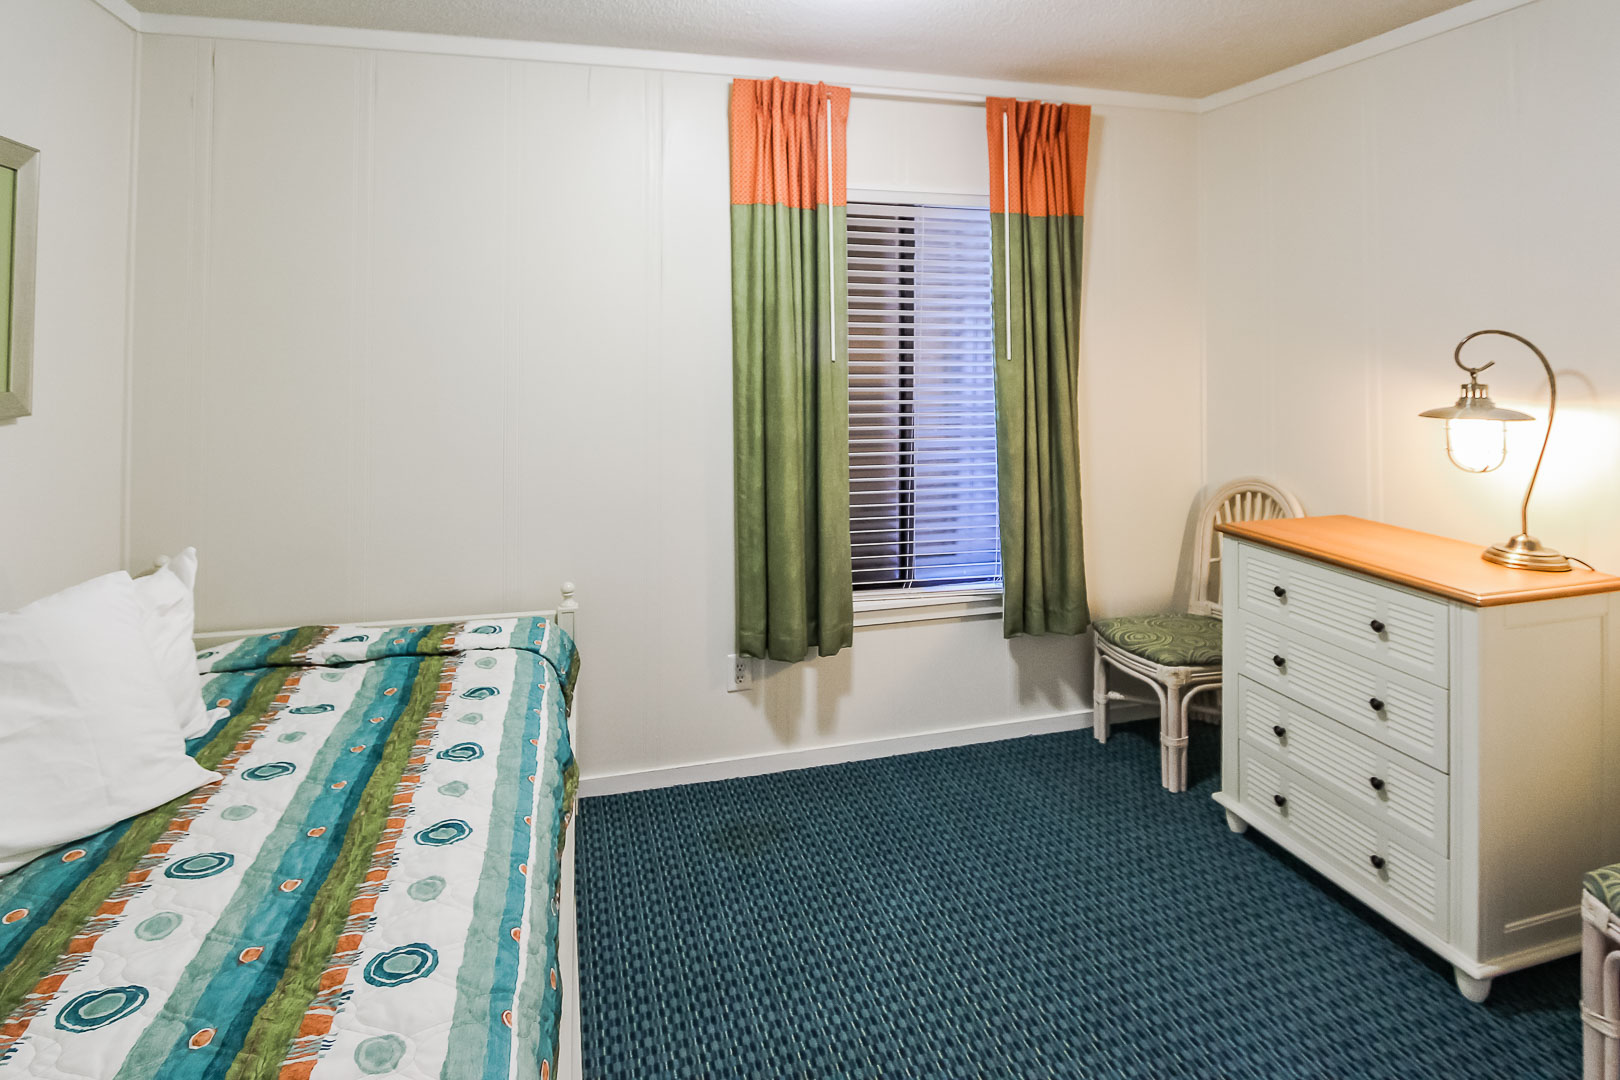 A traditional 1 and a half bedroom unit at VRI's A Place at the Beach III in North Carolina